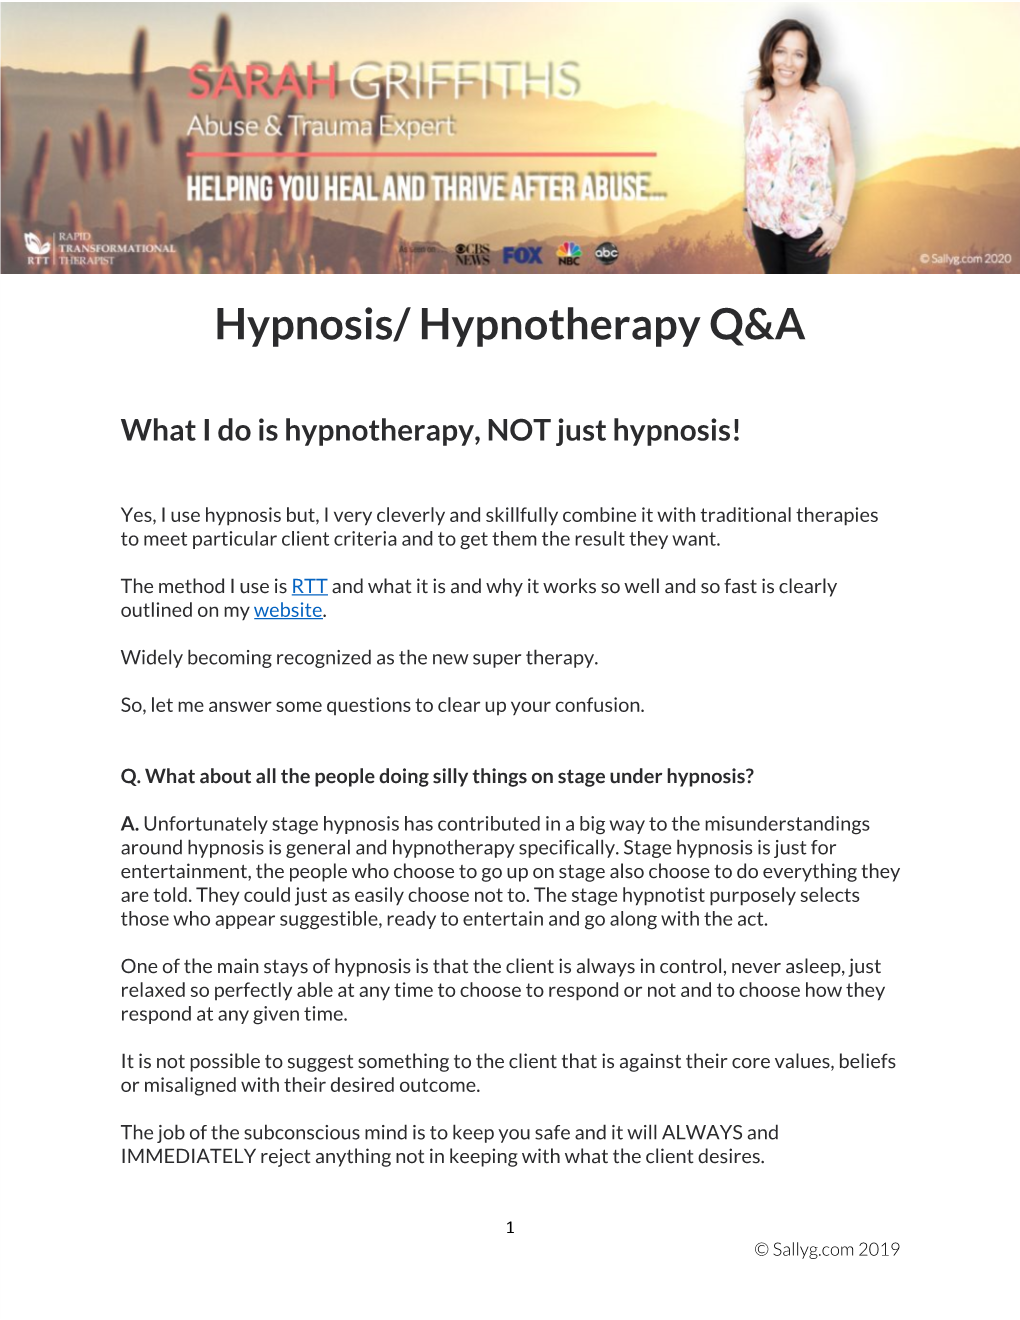 Hypnosis/ Hypnotherapy Q&A